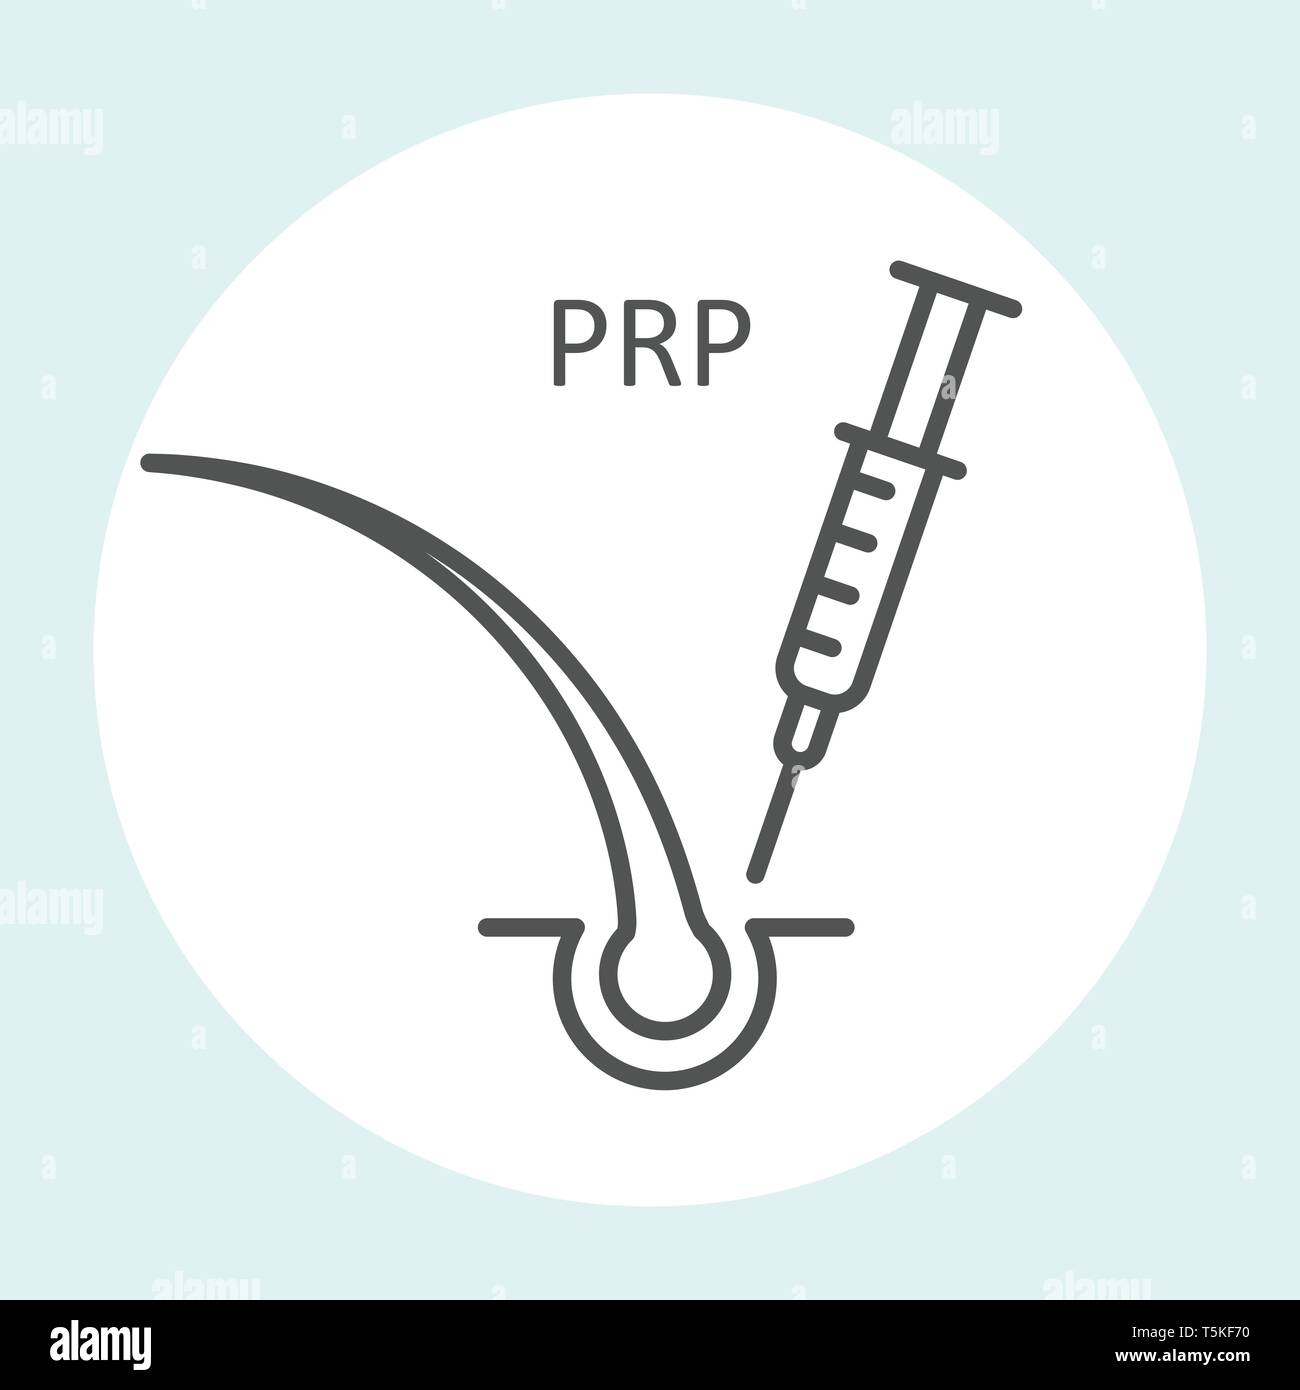 Platelet rich plasma icon, prp therapy, stop hair loss icon - syringe and hair Stock Vector